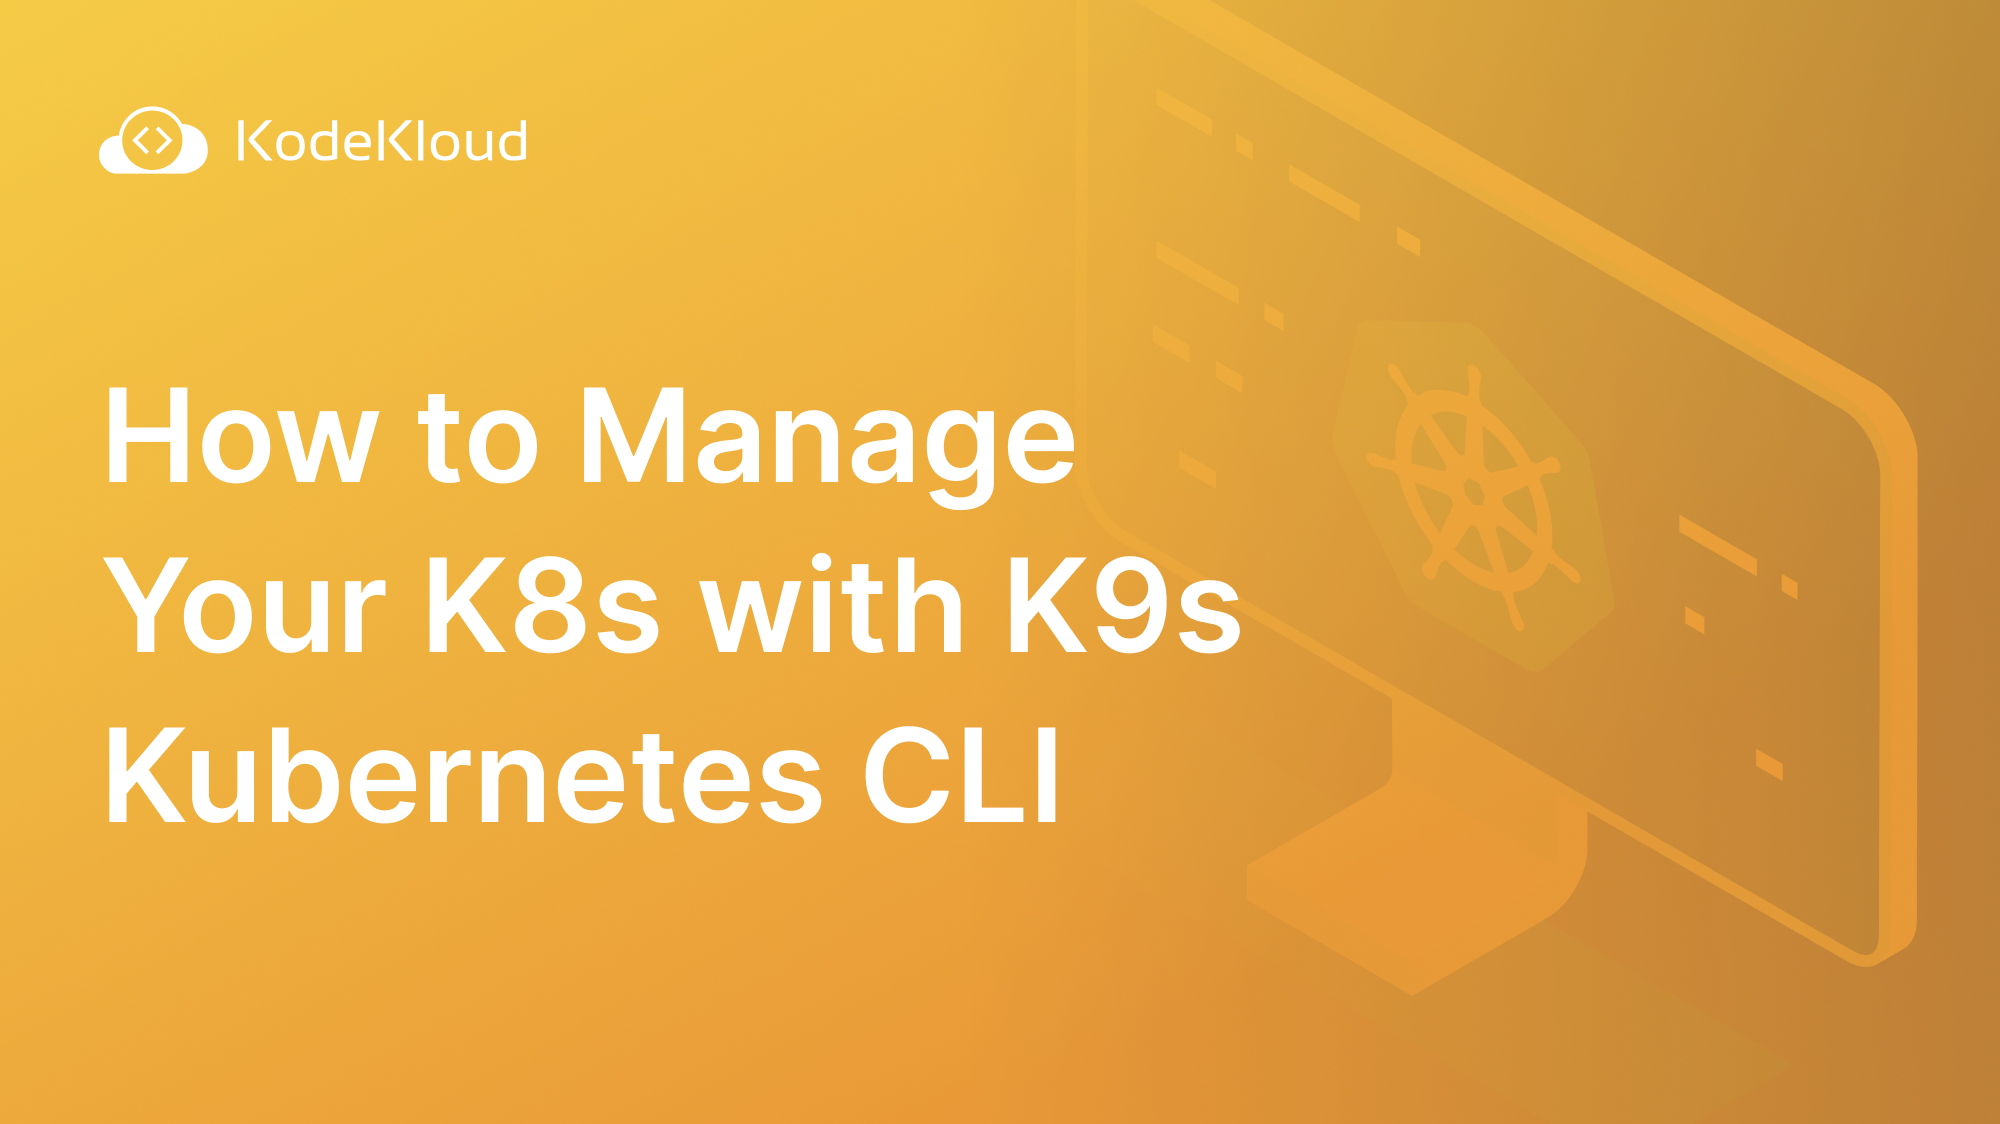 How to Manage Your K8s with K9s Kubernetes CLI